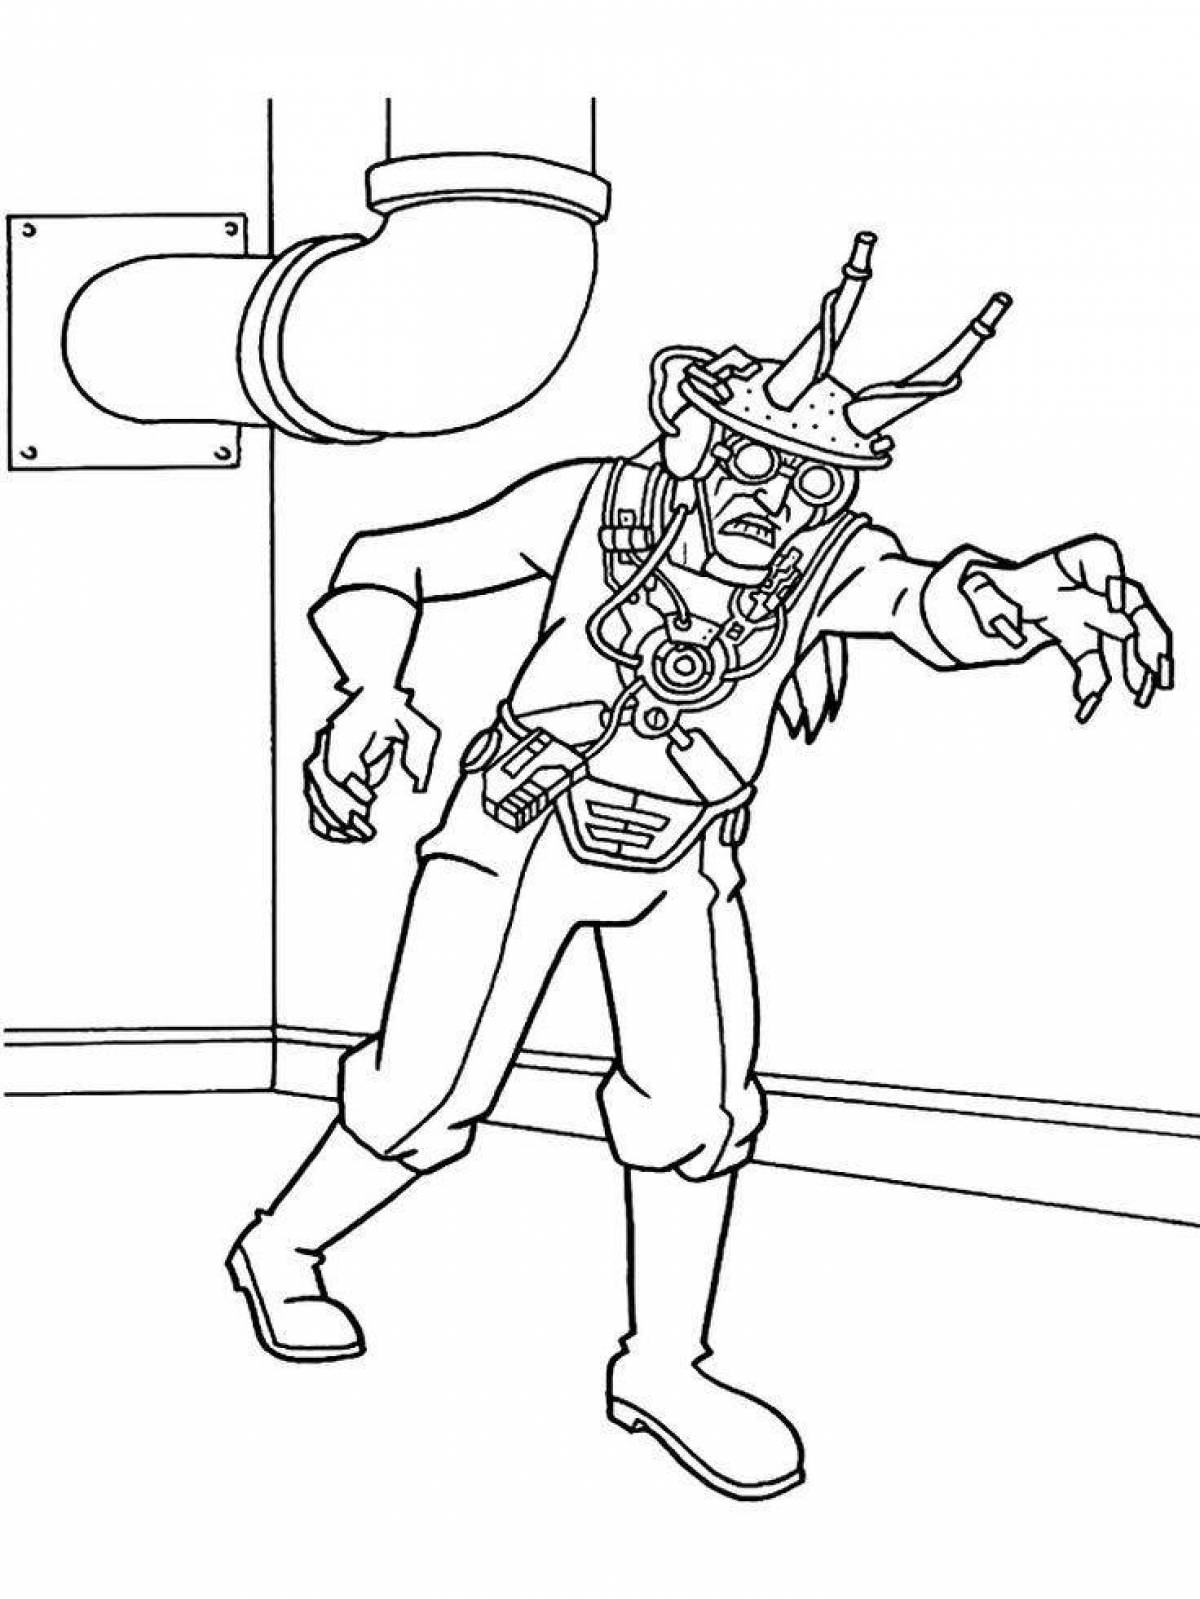 Playful ace coloring page